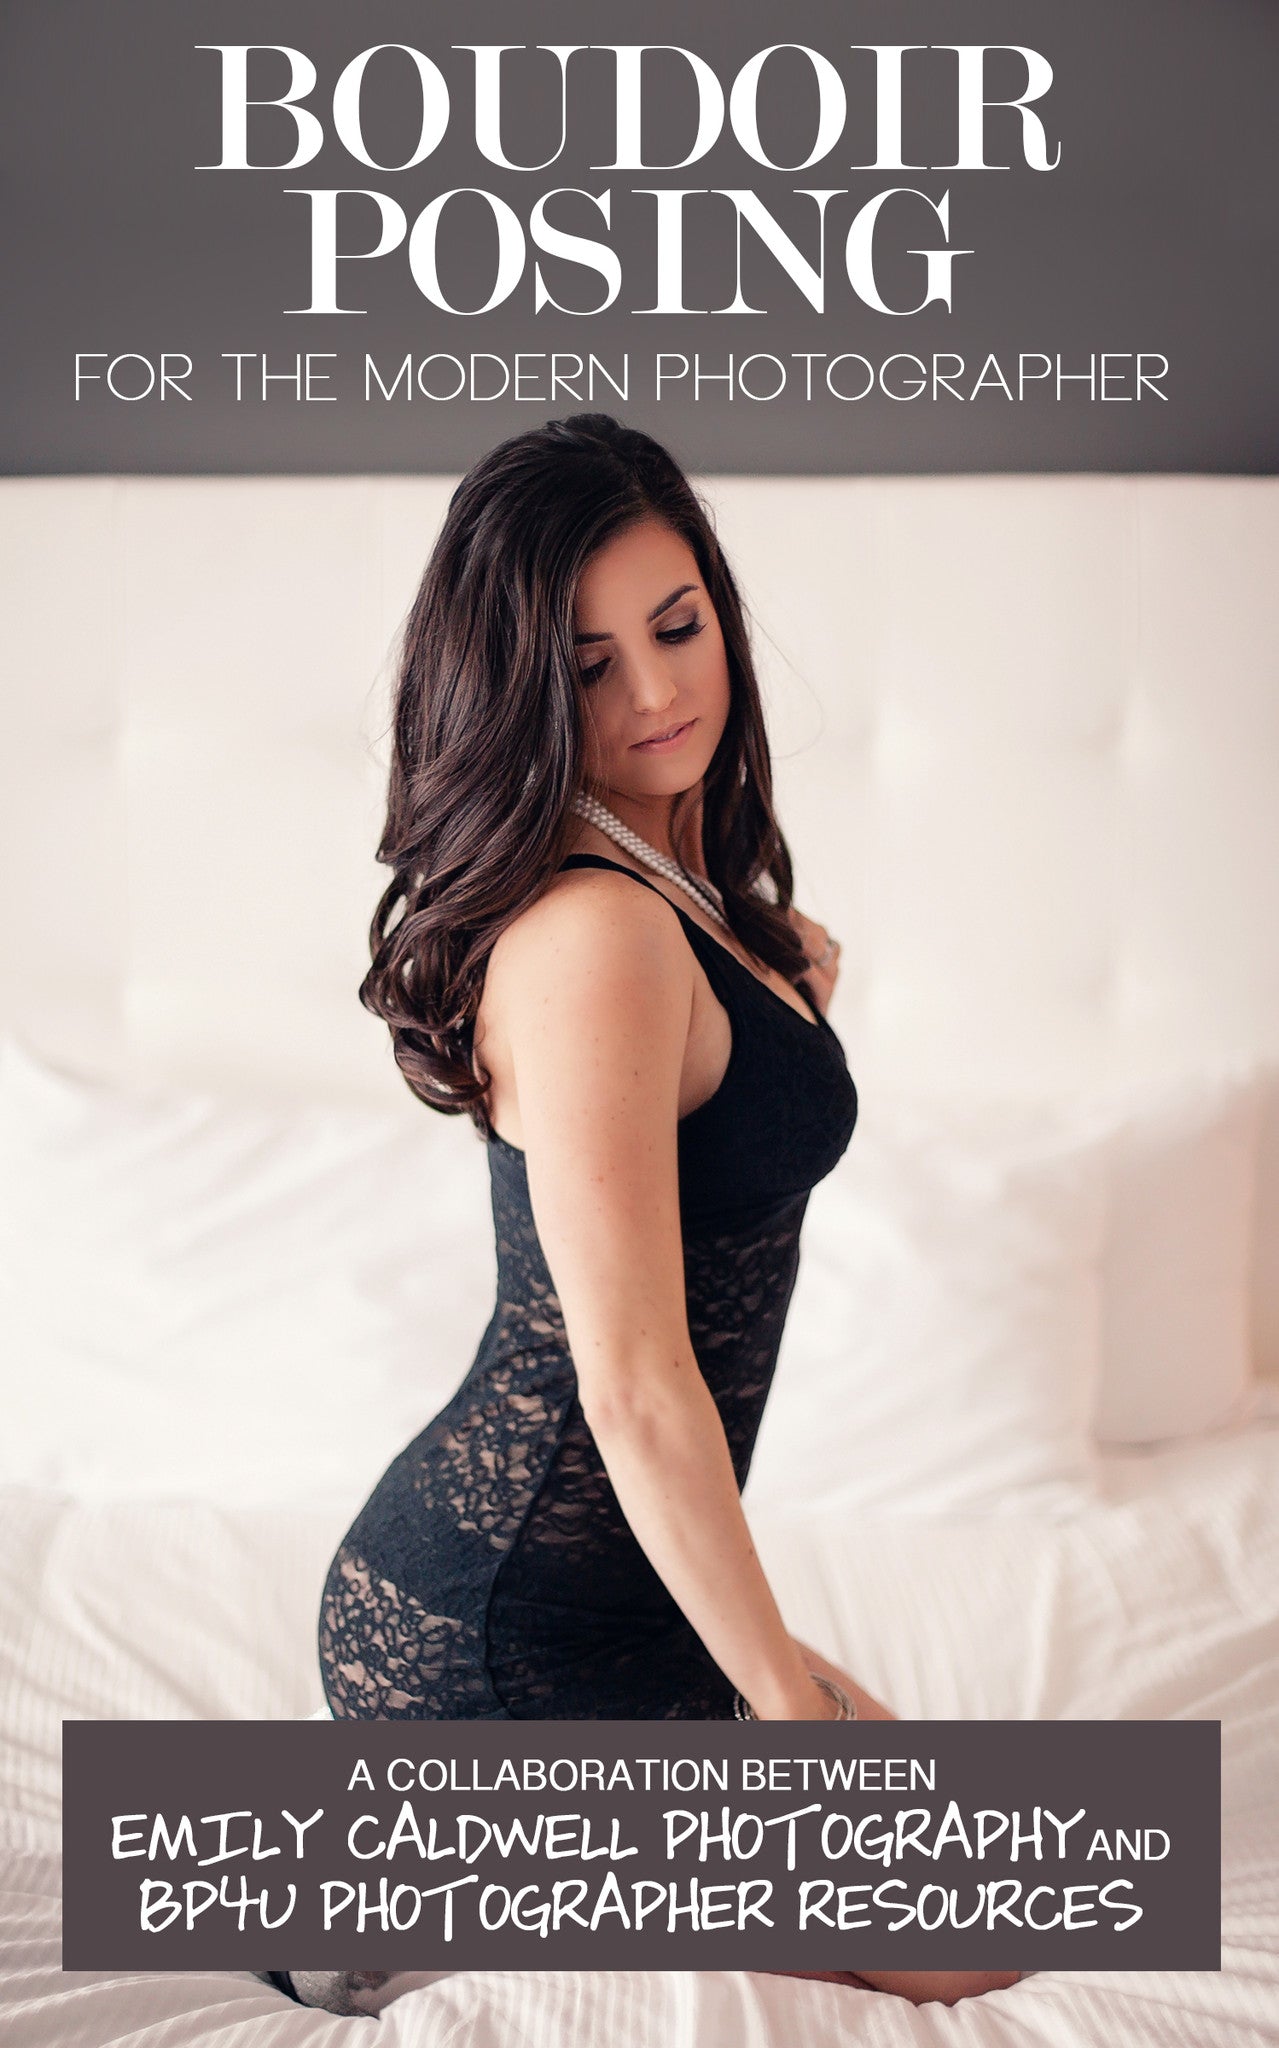 What to wear for your boudoir photoshoot?